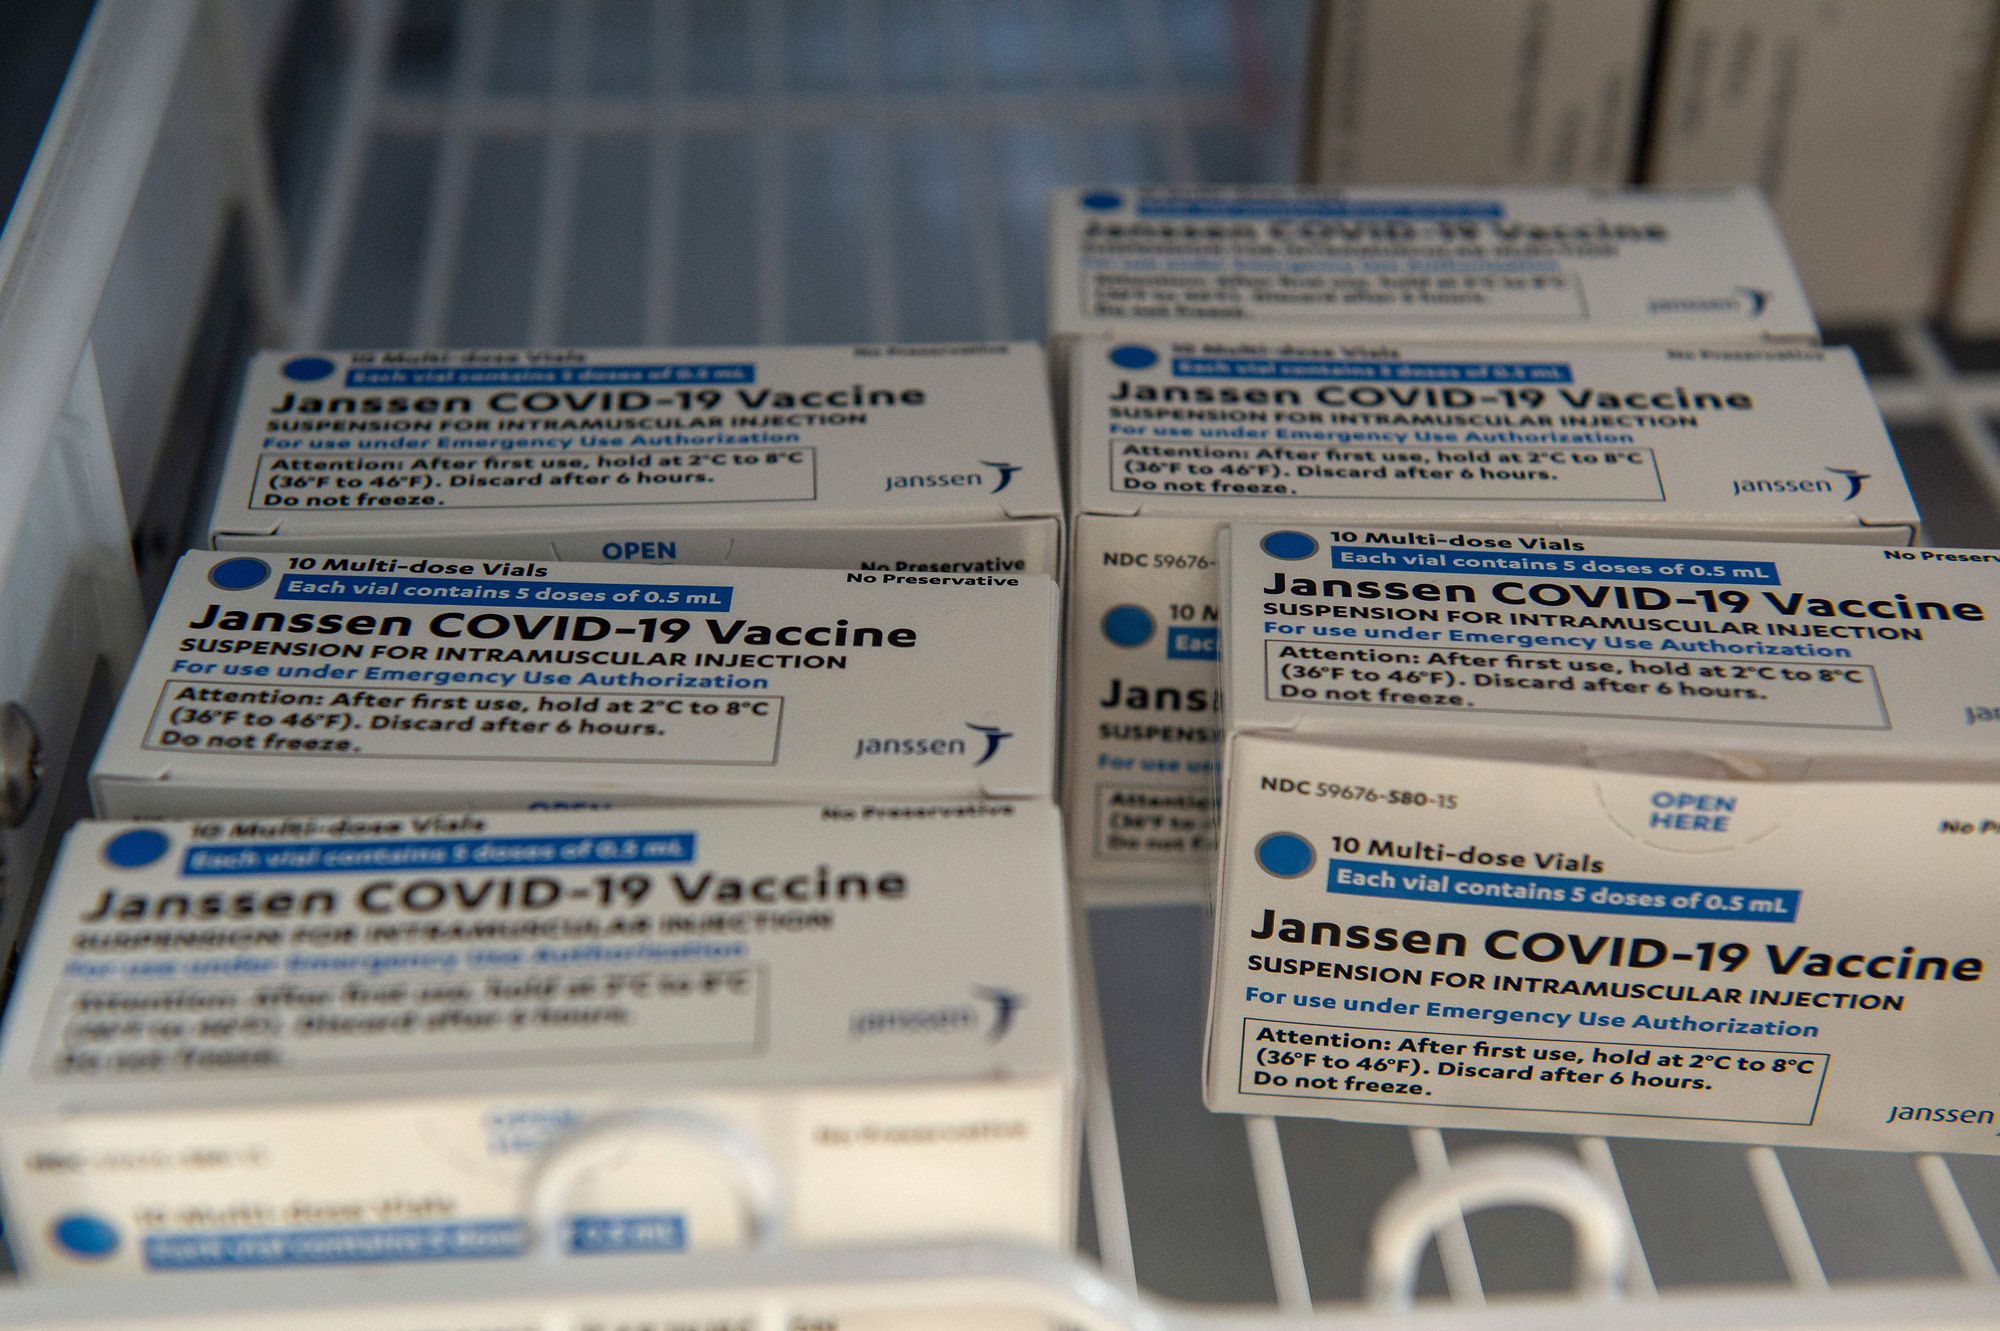 Johnson & Johnson Covid-19 Janssen Vaccine boxes sit in a locked refrigerator at the US Department of Veterans Affairs' VA Boston Healthcare System's Jamaica Plain Medical Center in Boston on March 4.